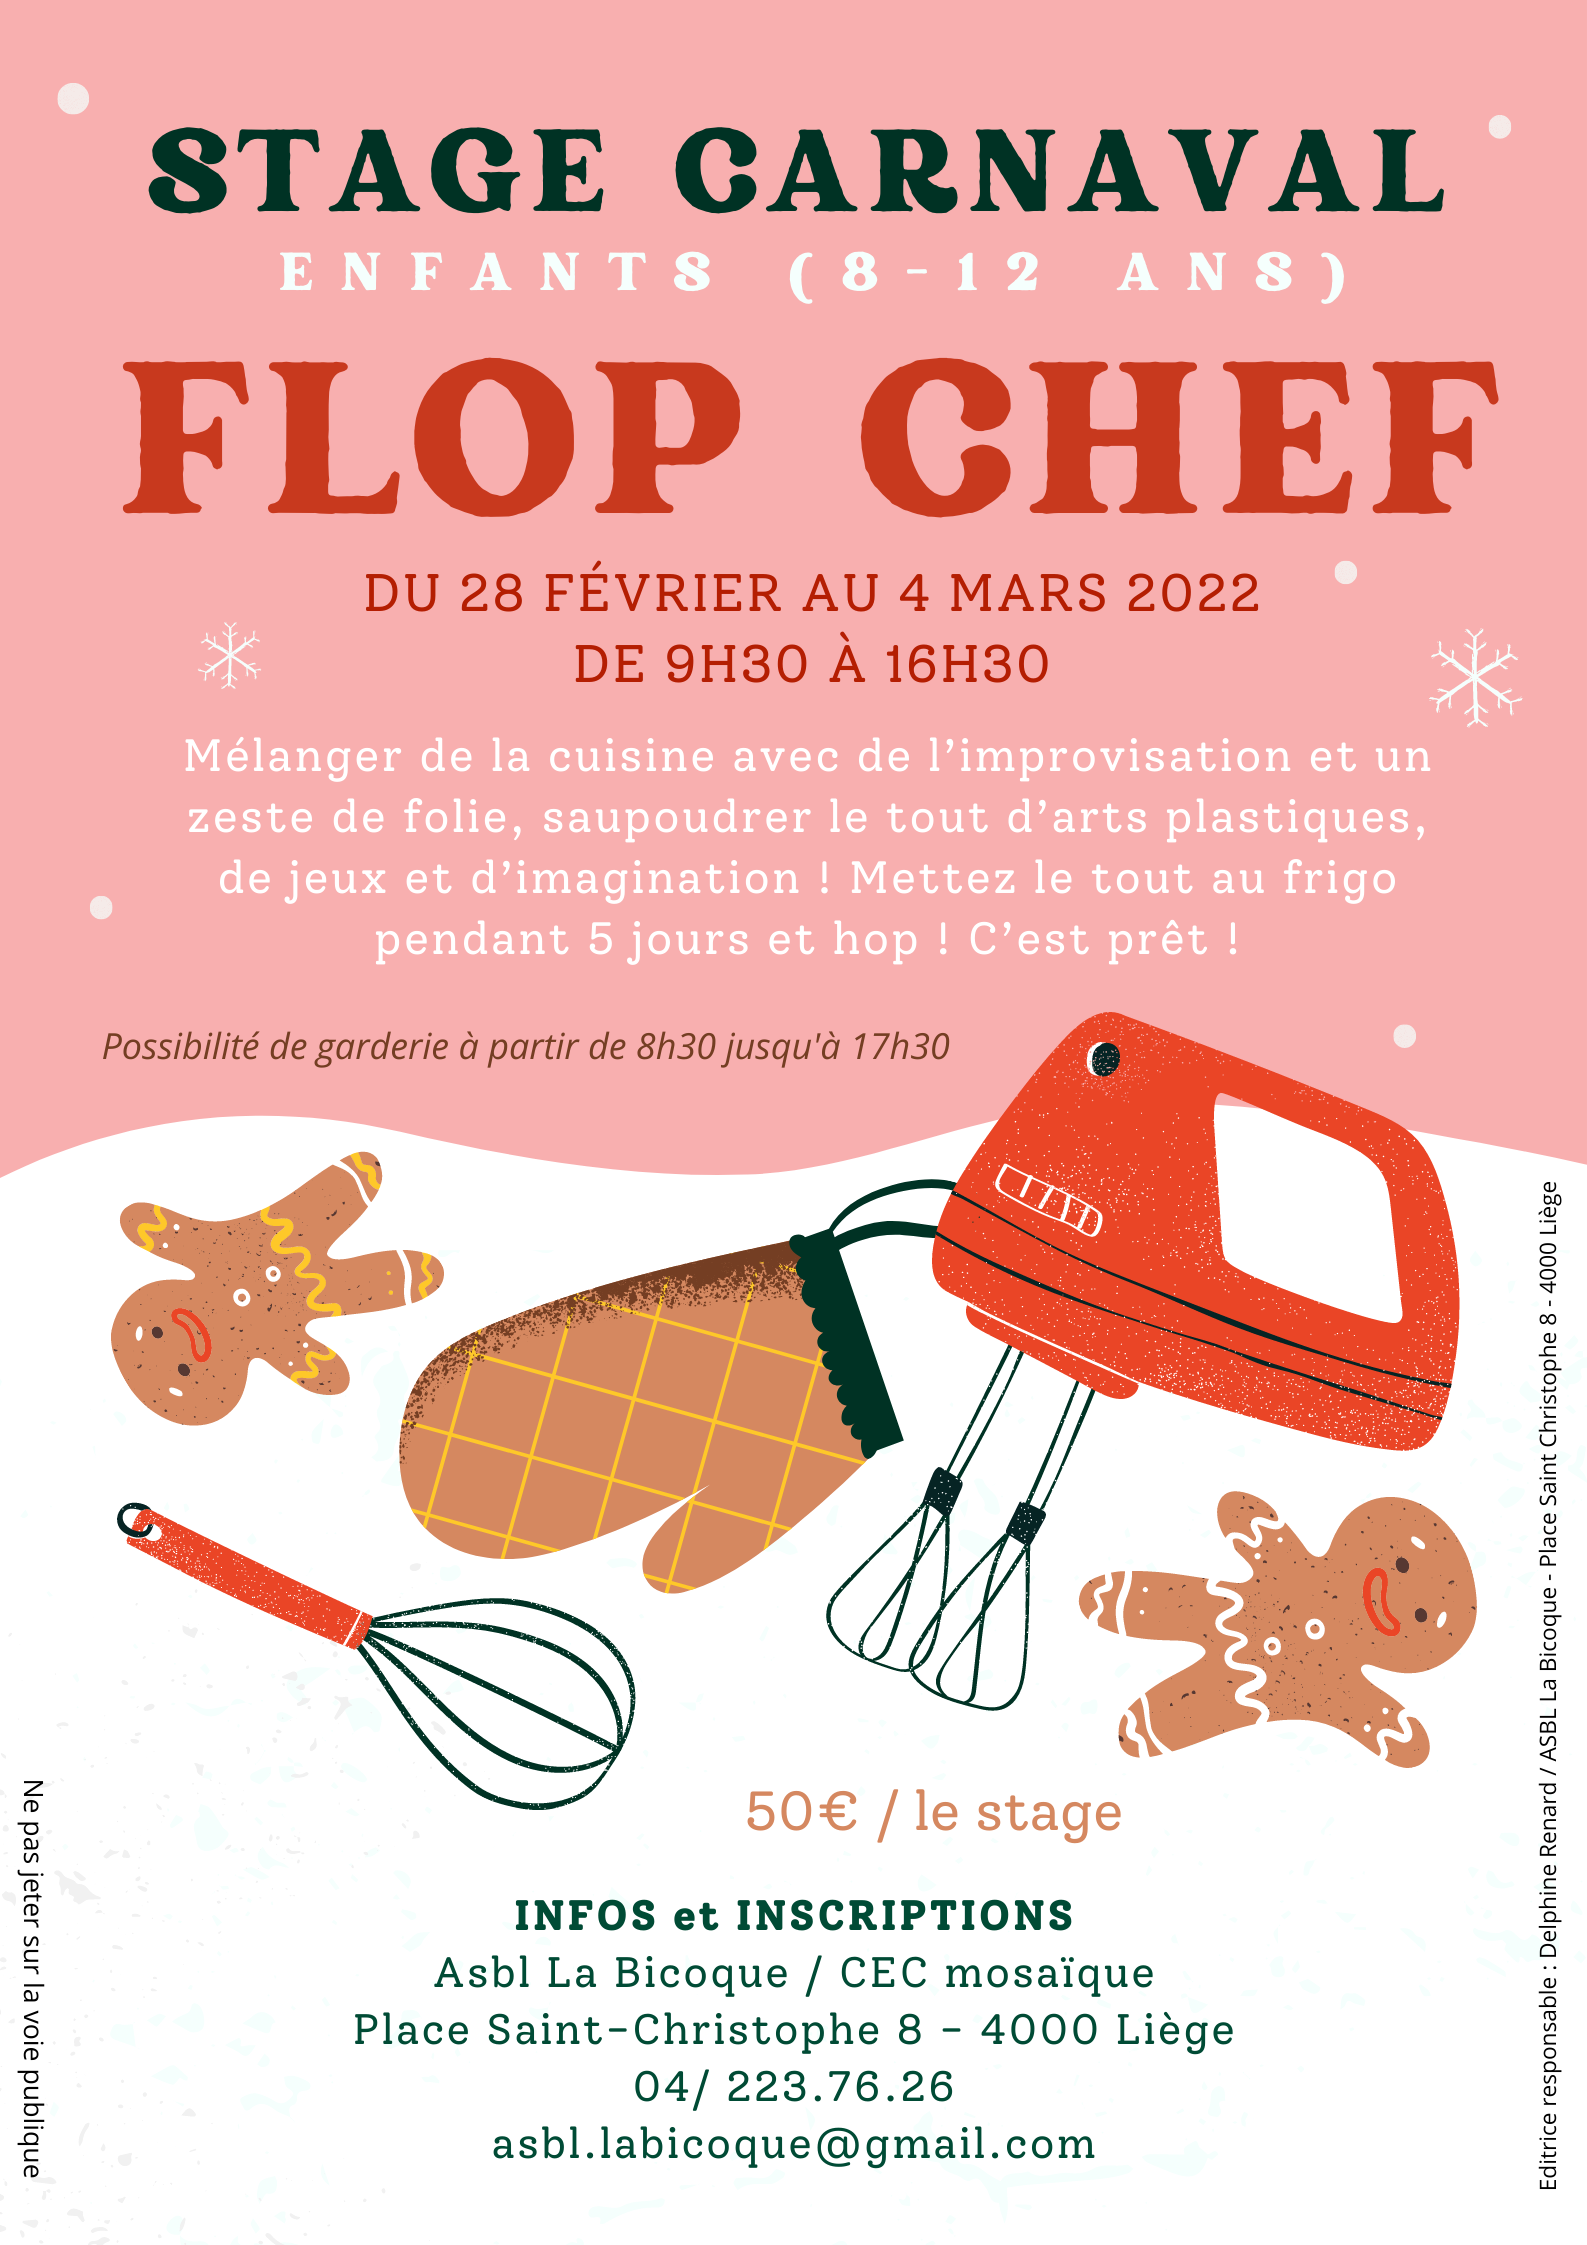 FLOP CHEF